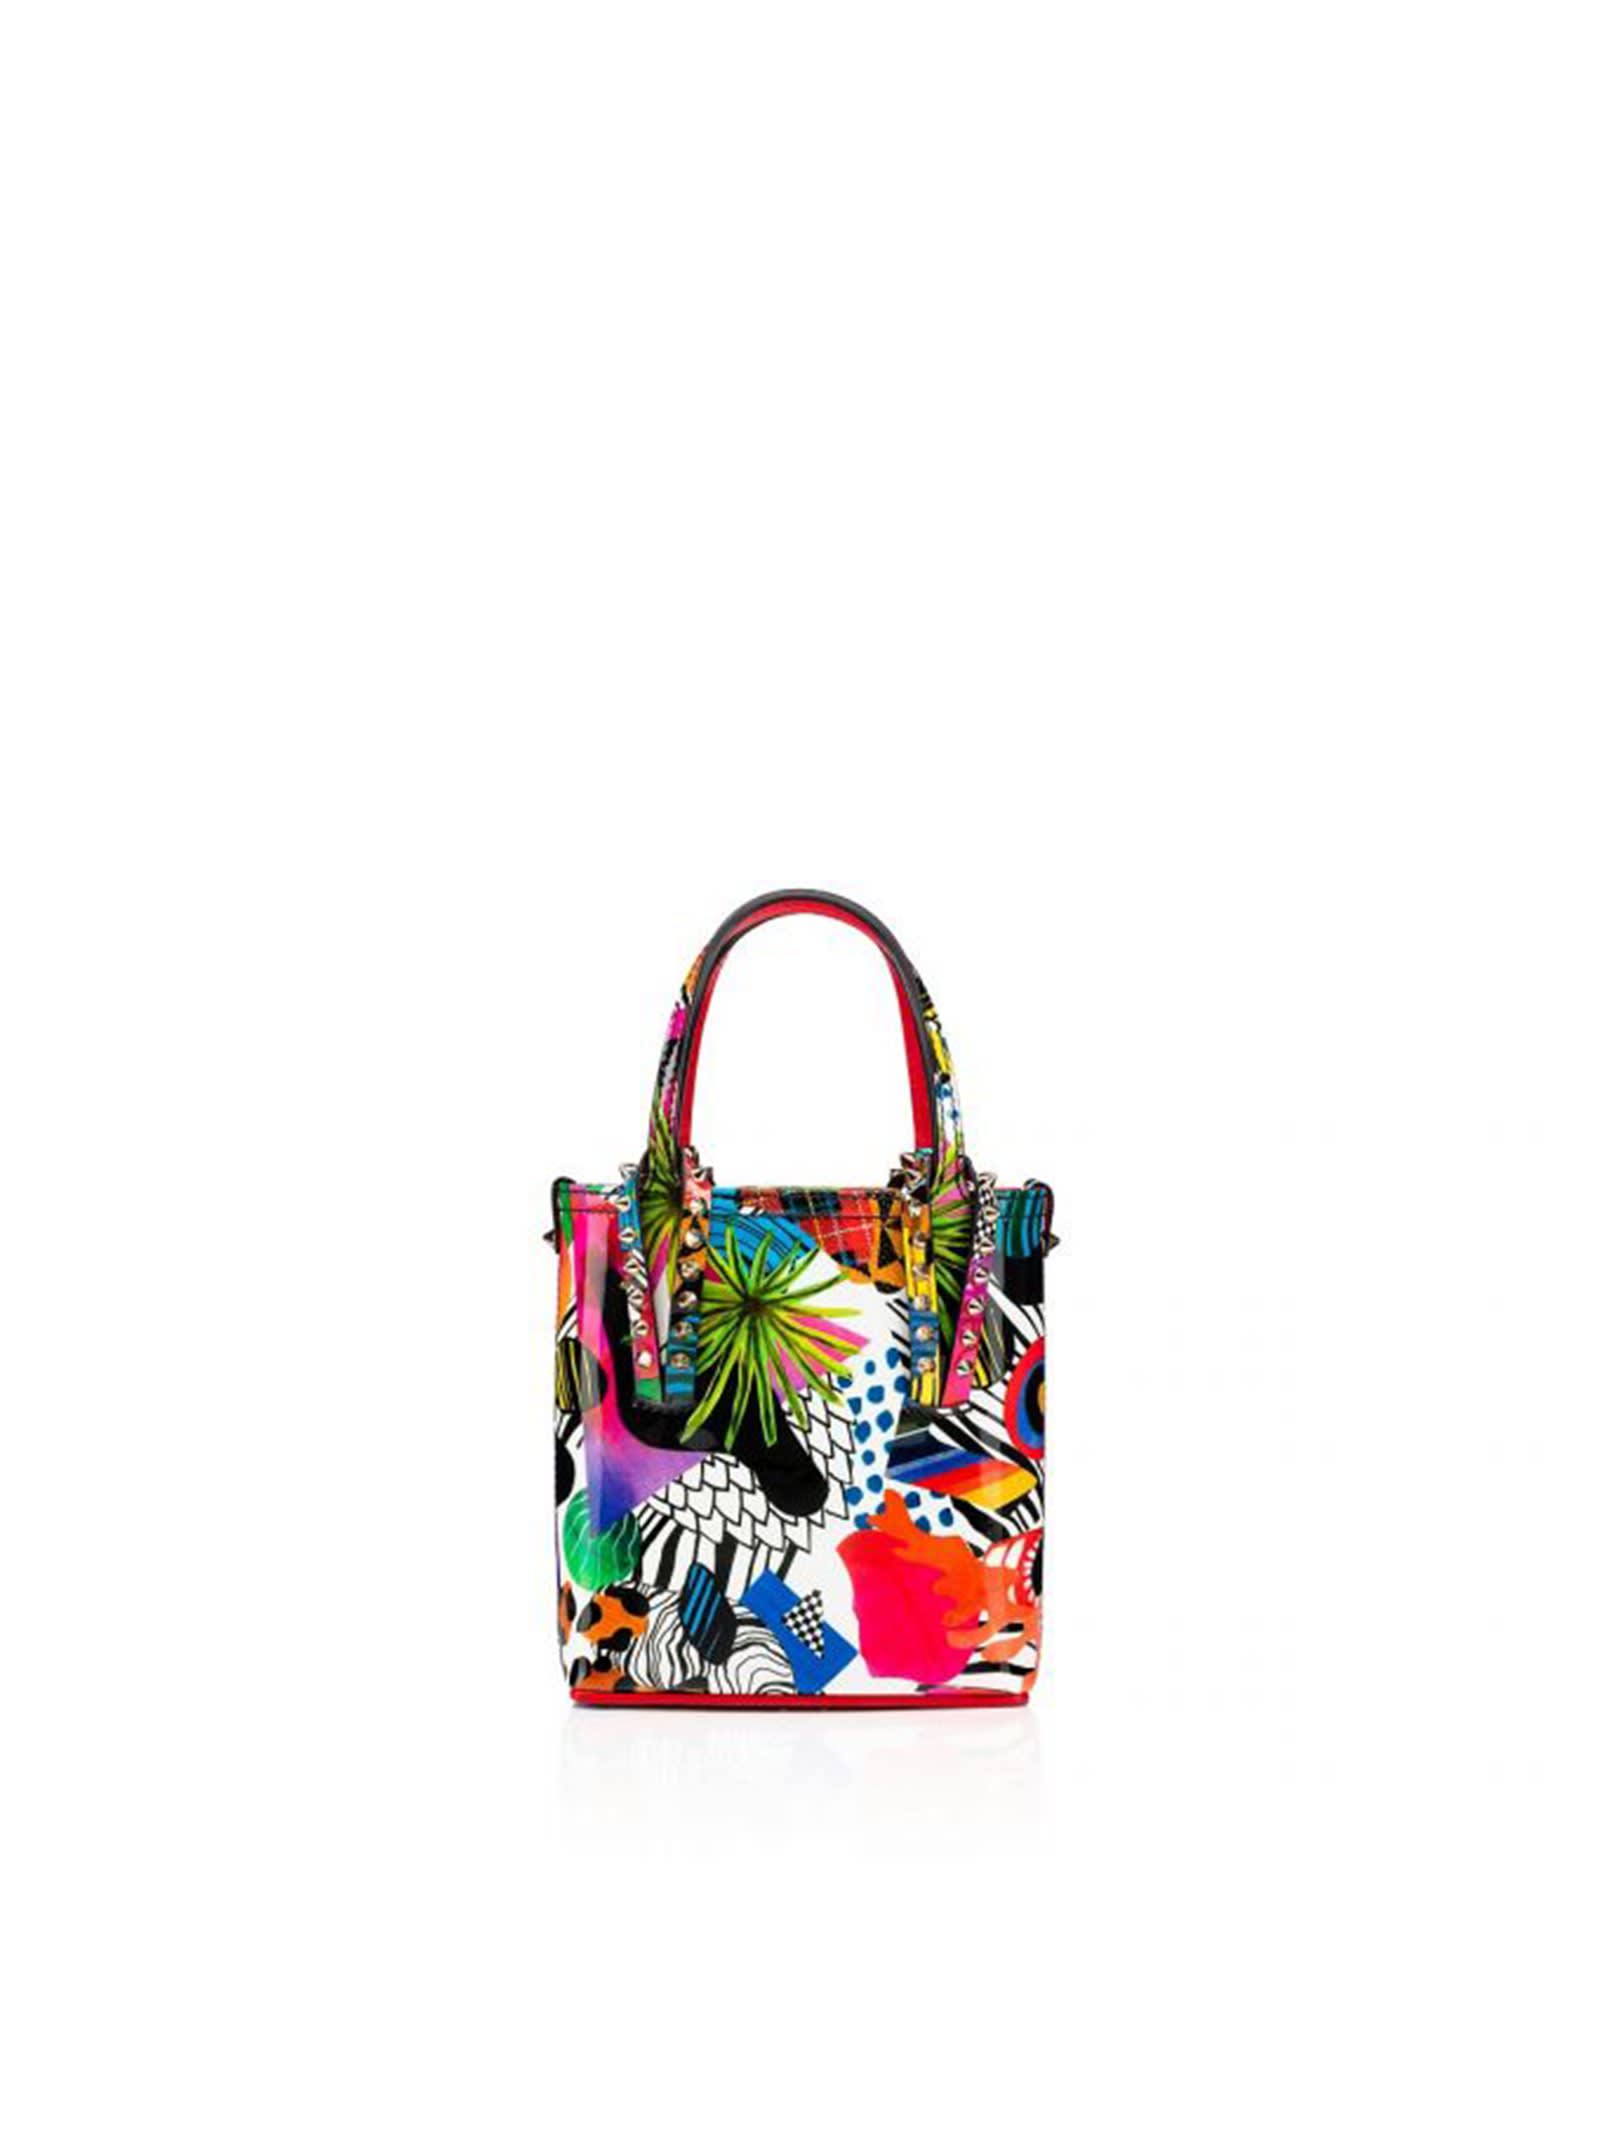 Christian Louboutin Cabata Small Multicolor Logo Patent Tote Bag Pouch NEW  